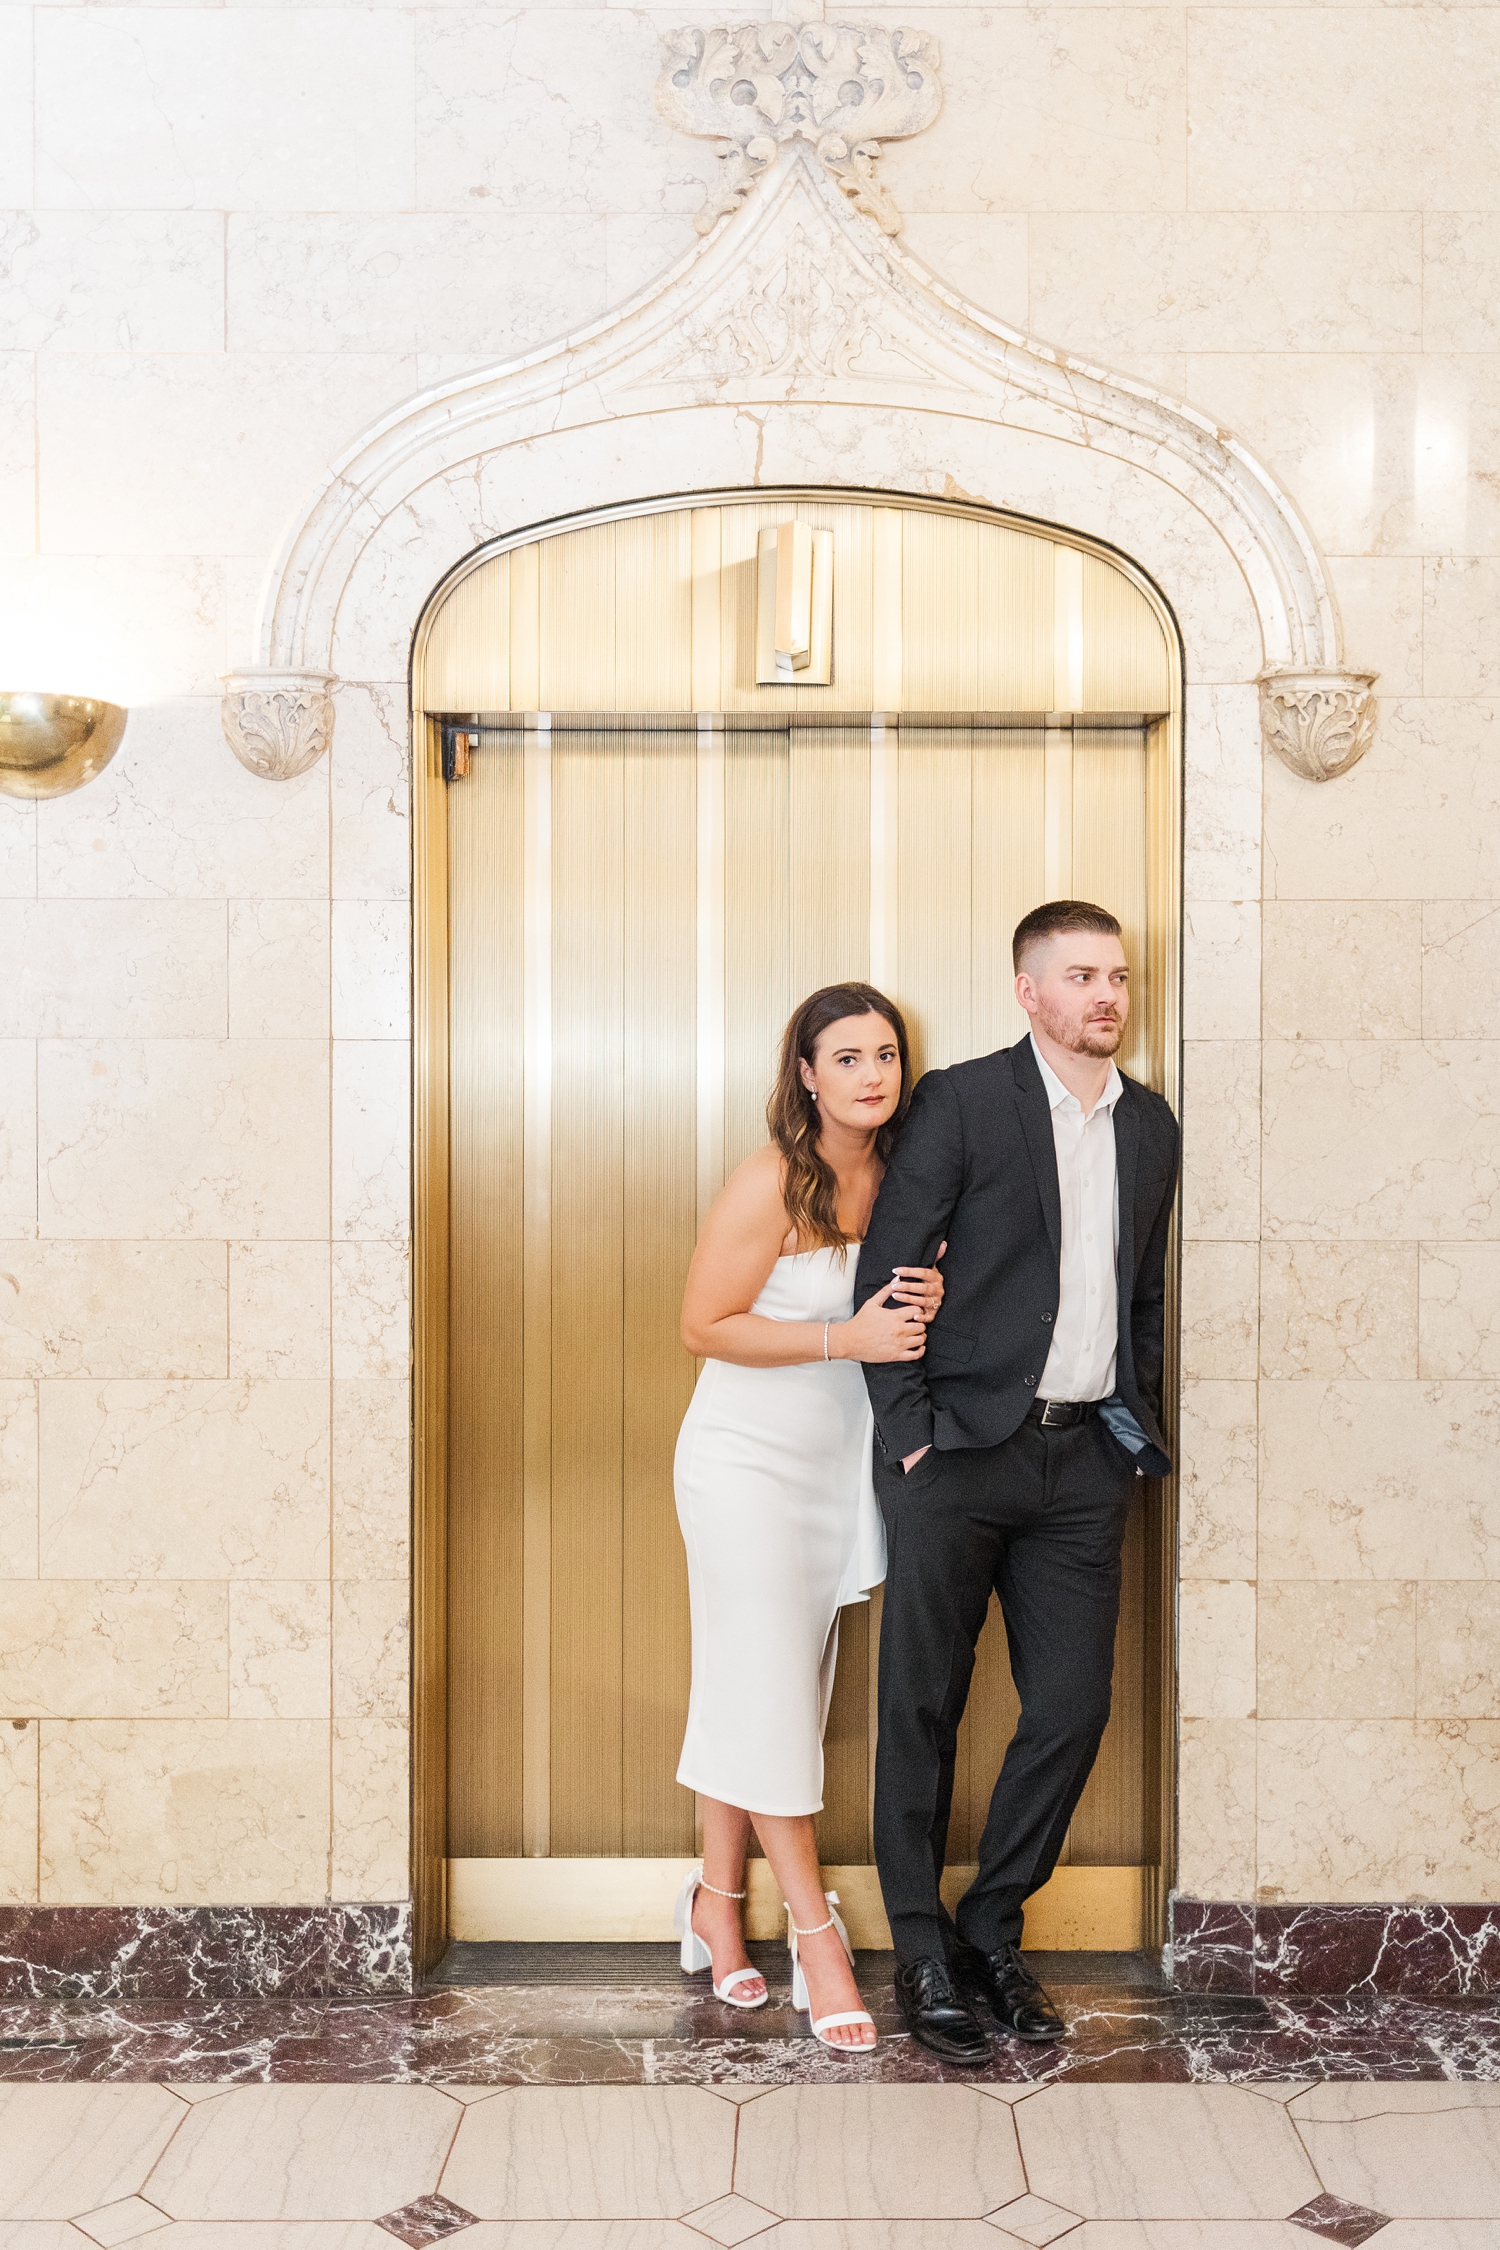 Jenna and Dustin lean against a gold elevator in the lobby entrance of The Equitable Building in Des Moines, IA | CB Studio